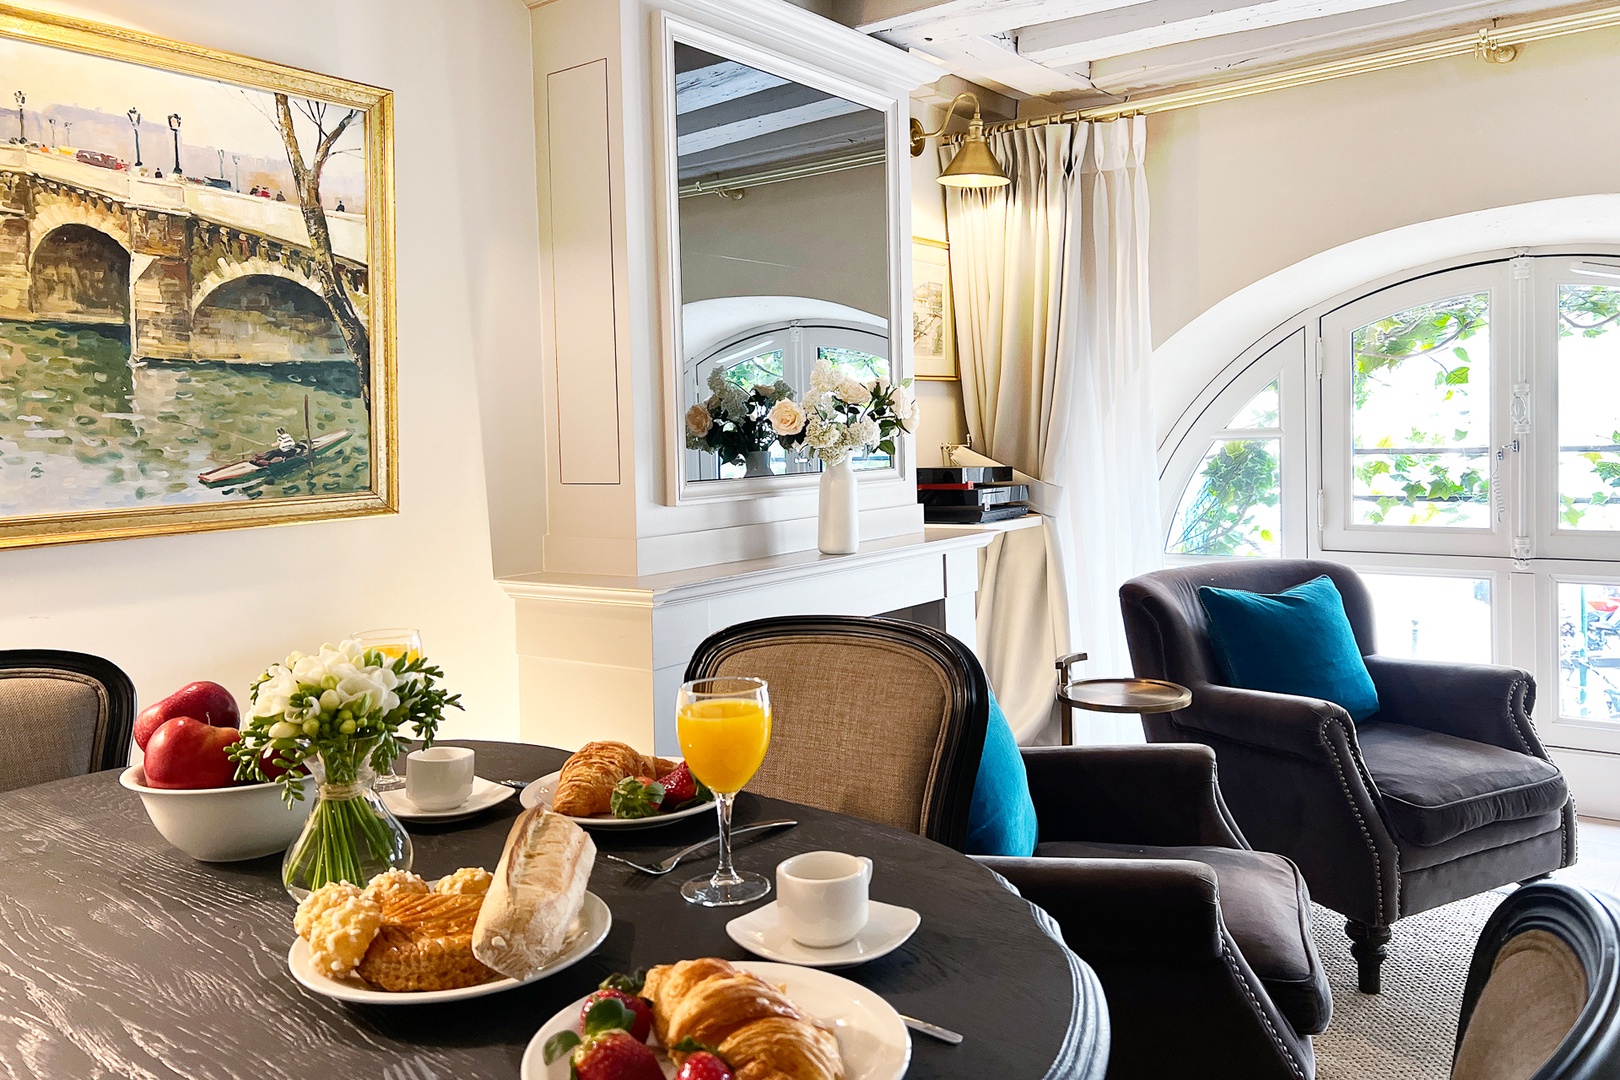 The dining area overlooks the charming Place Dauphine.